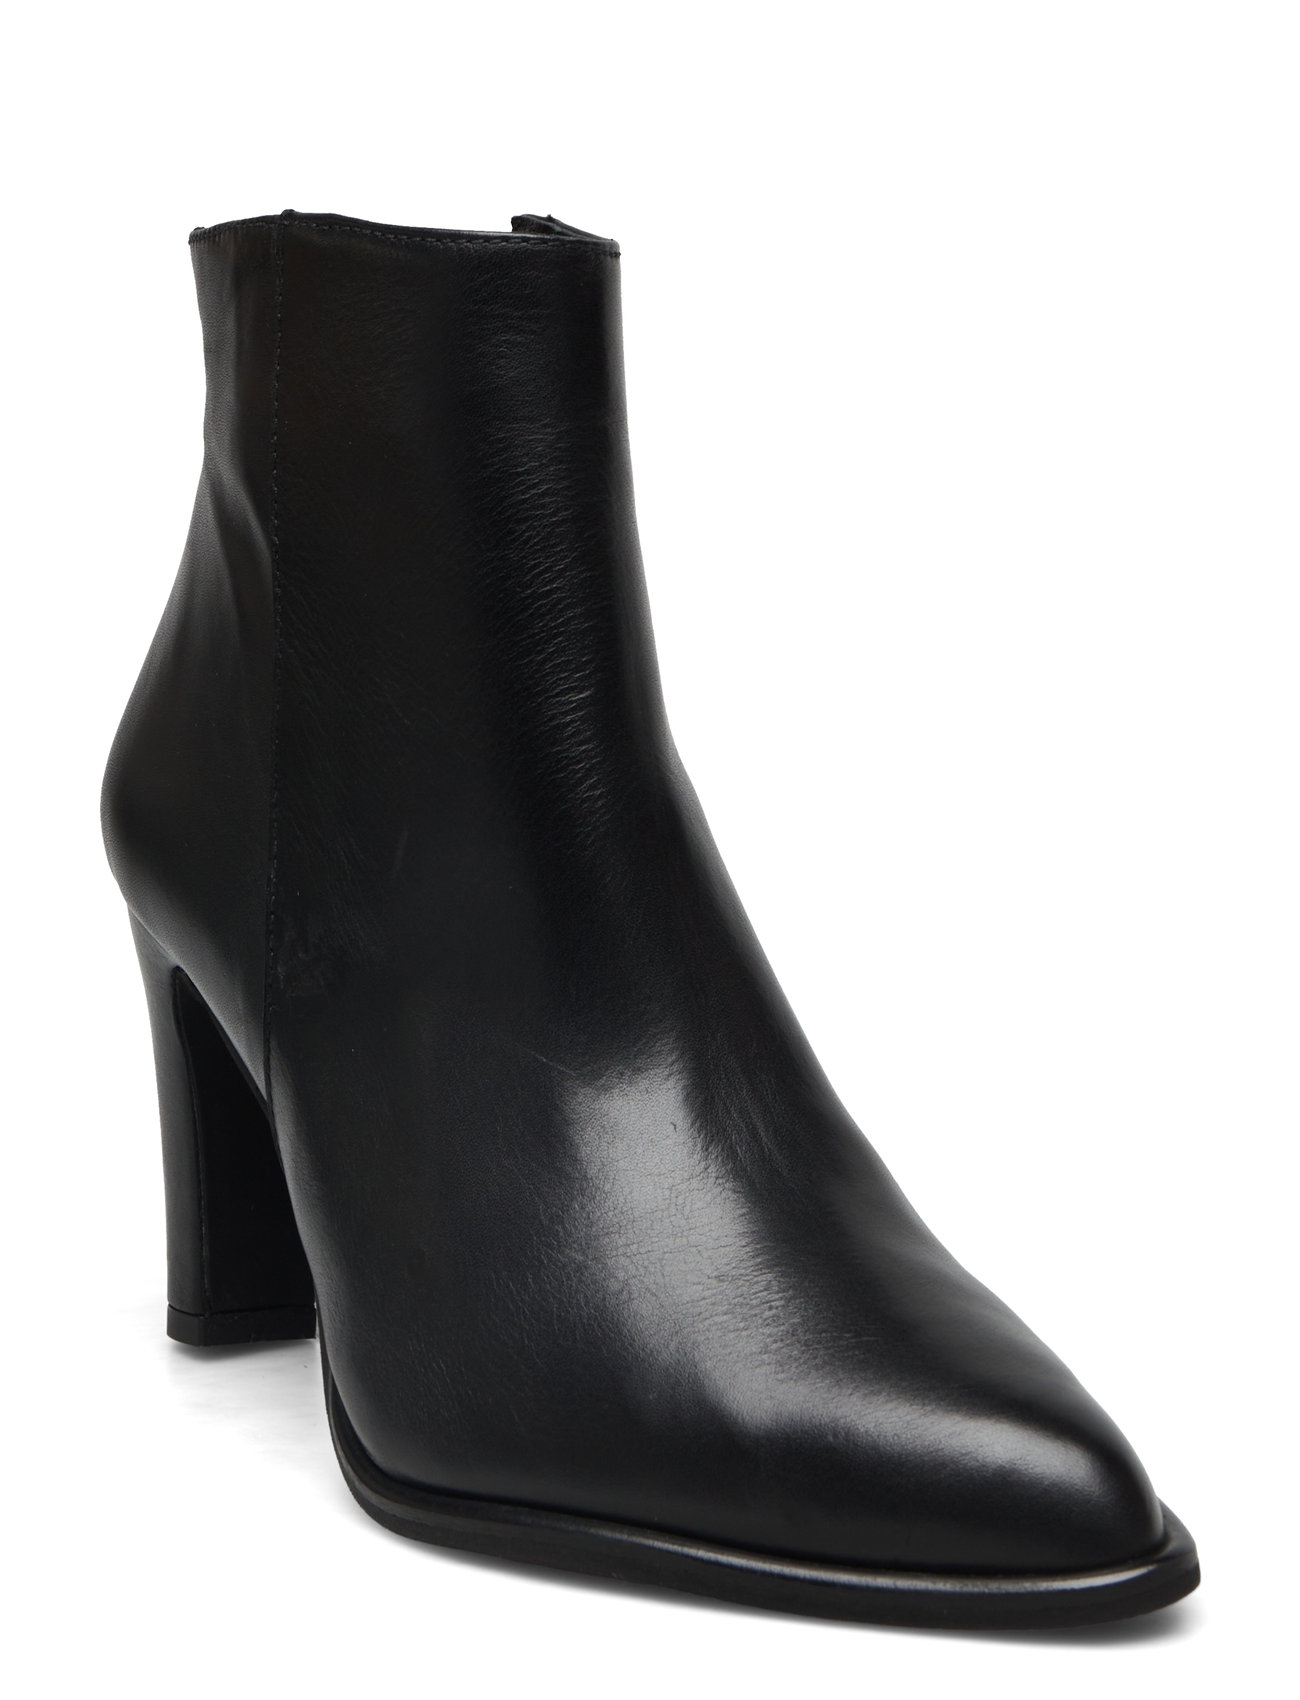 Engela Shoes Boots Ankle Boots Ankle Boots With Heel Black Pavement